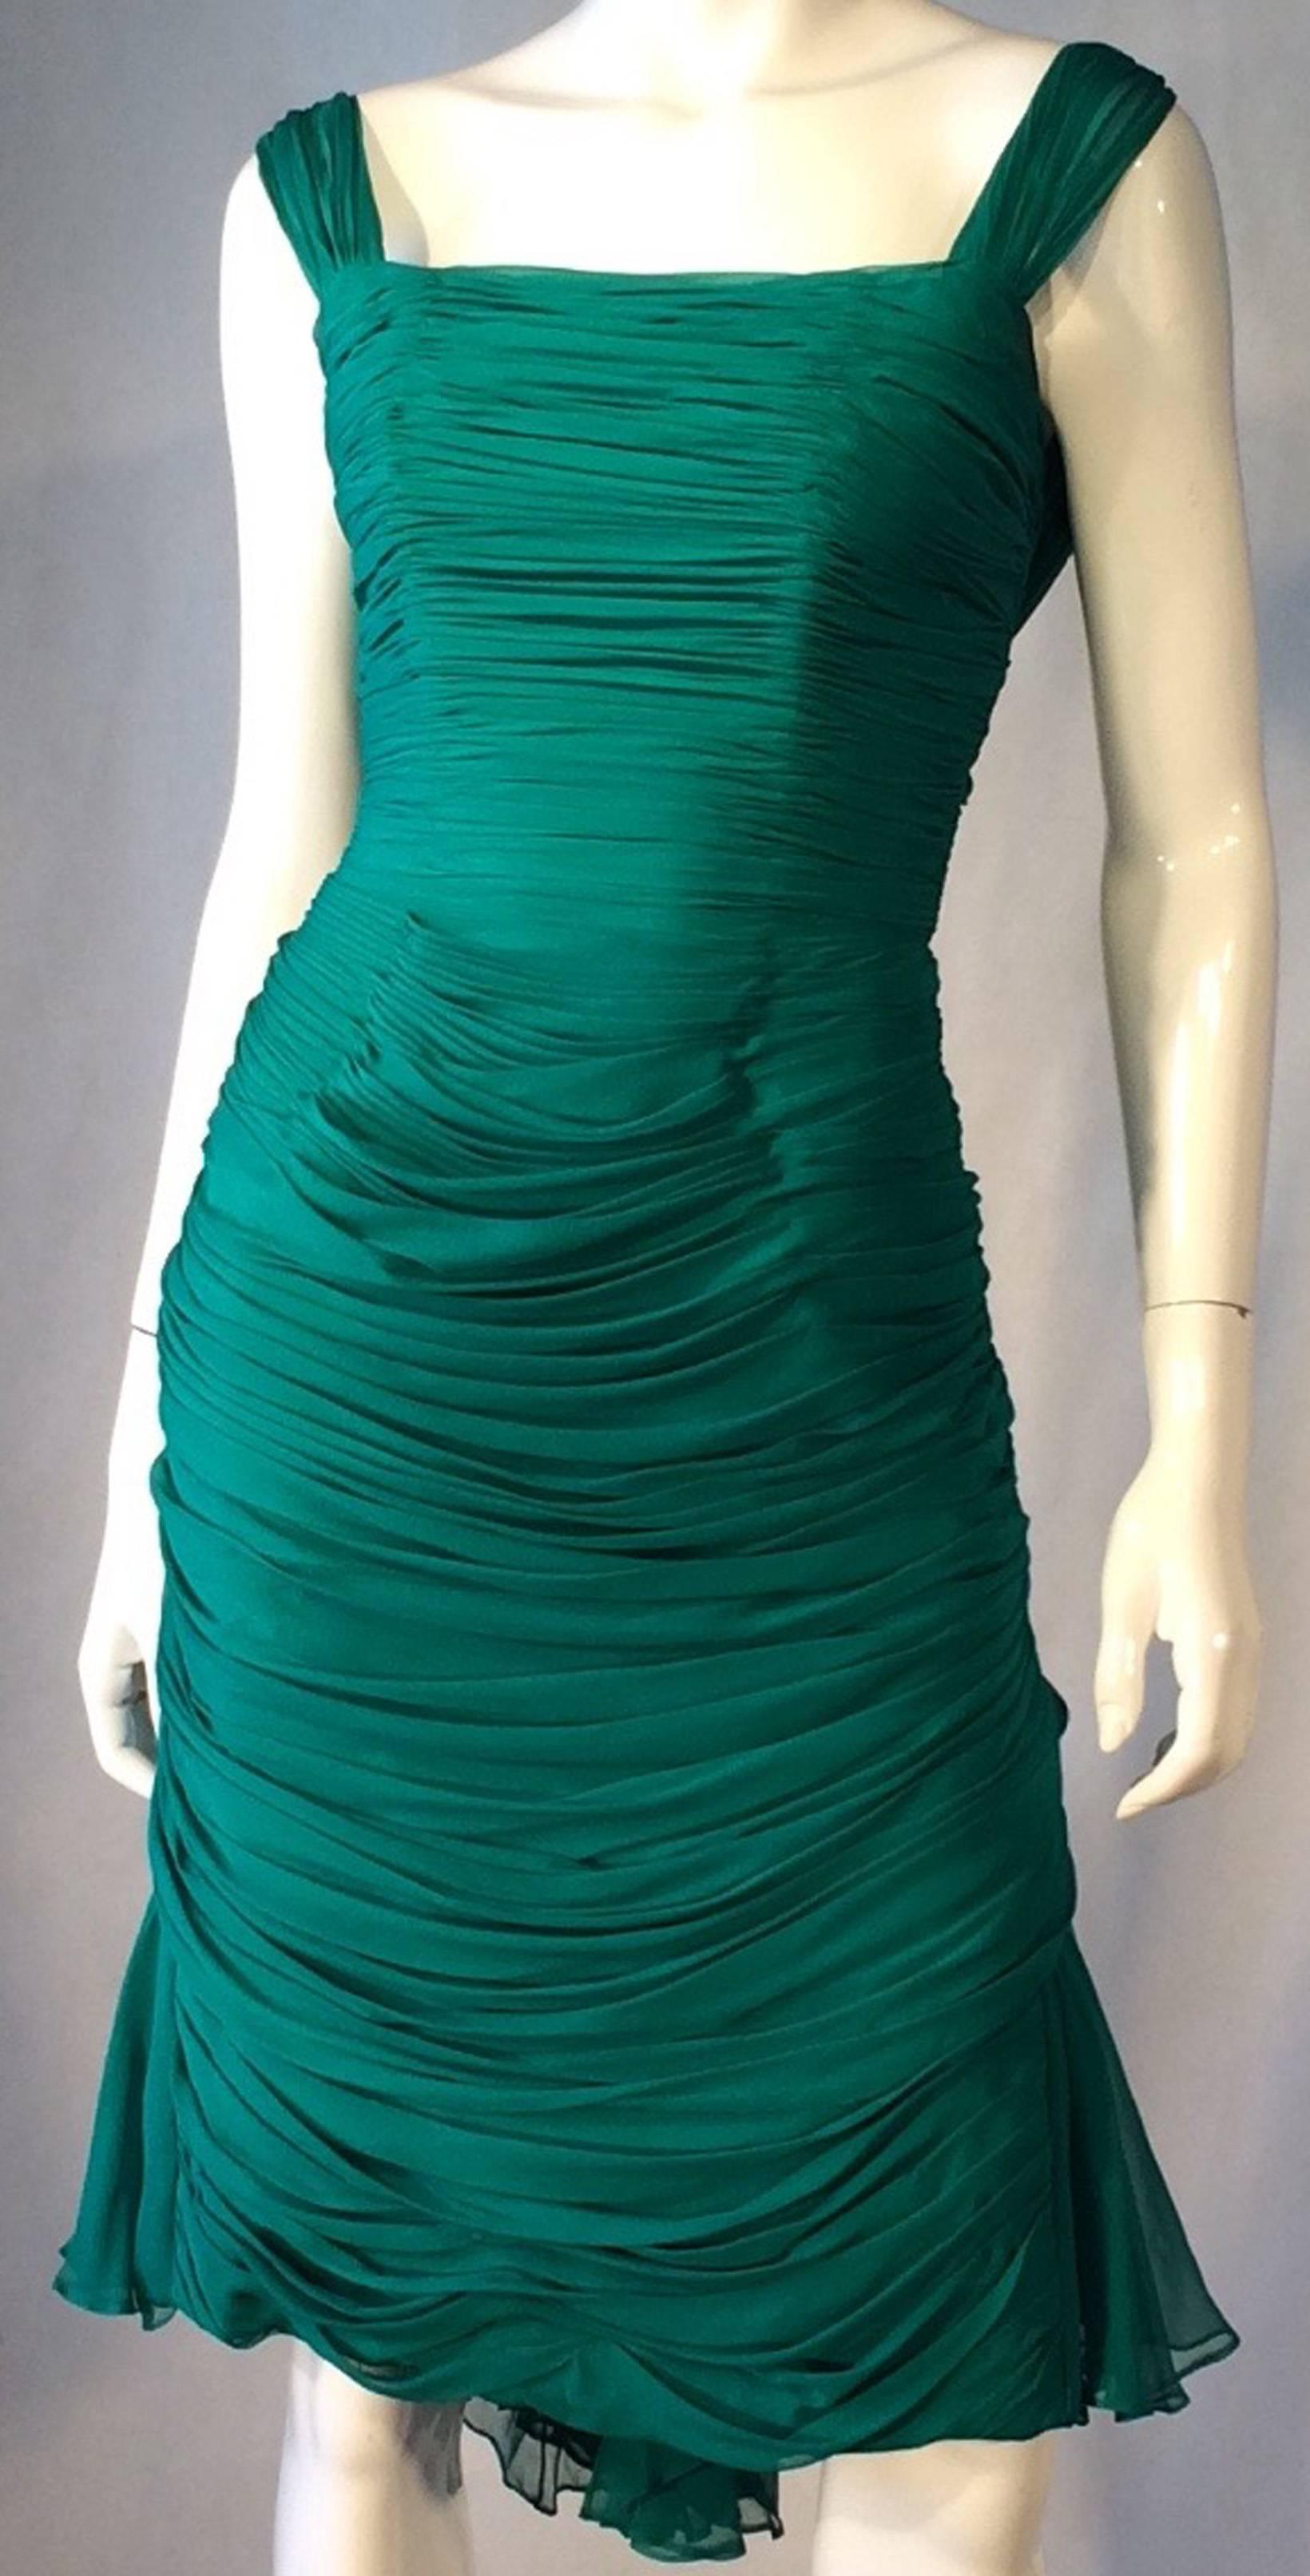 A fine and rare vintage Jean Desses silk chiffon cocktail dress. Stunning emerald green silk chiffon item features paneled and ruched details with draped back and flowing train. Item fully lined with a boned bodice and zips up back. 